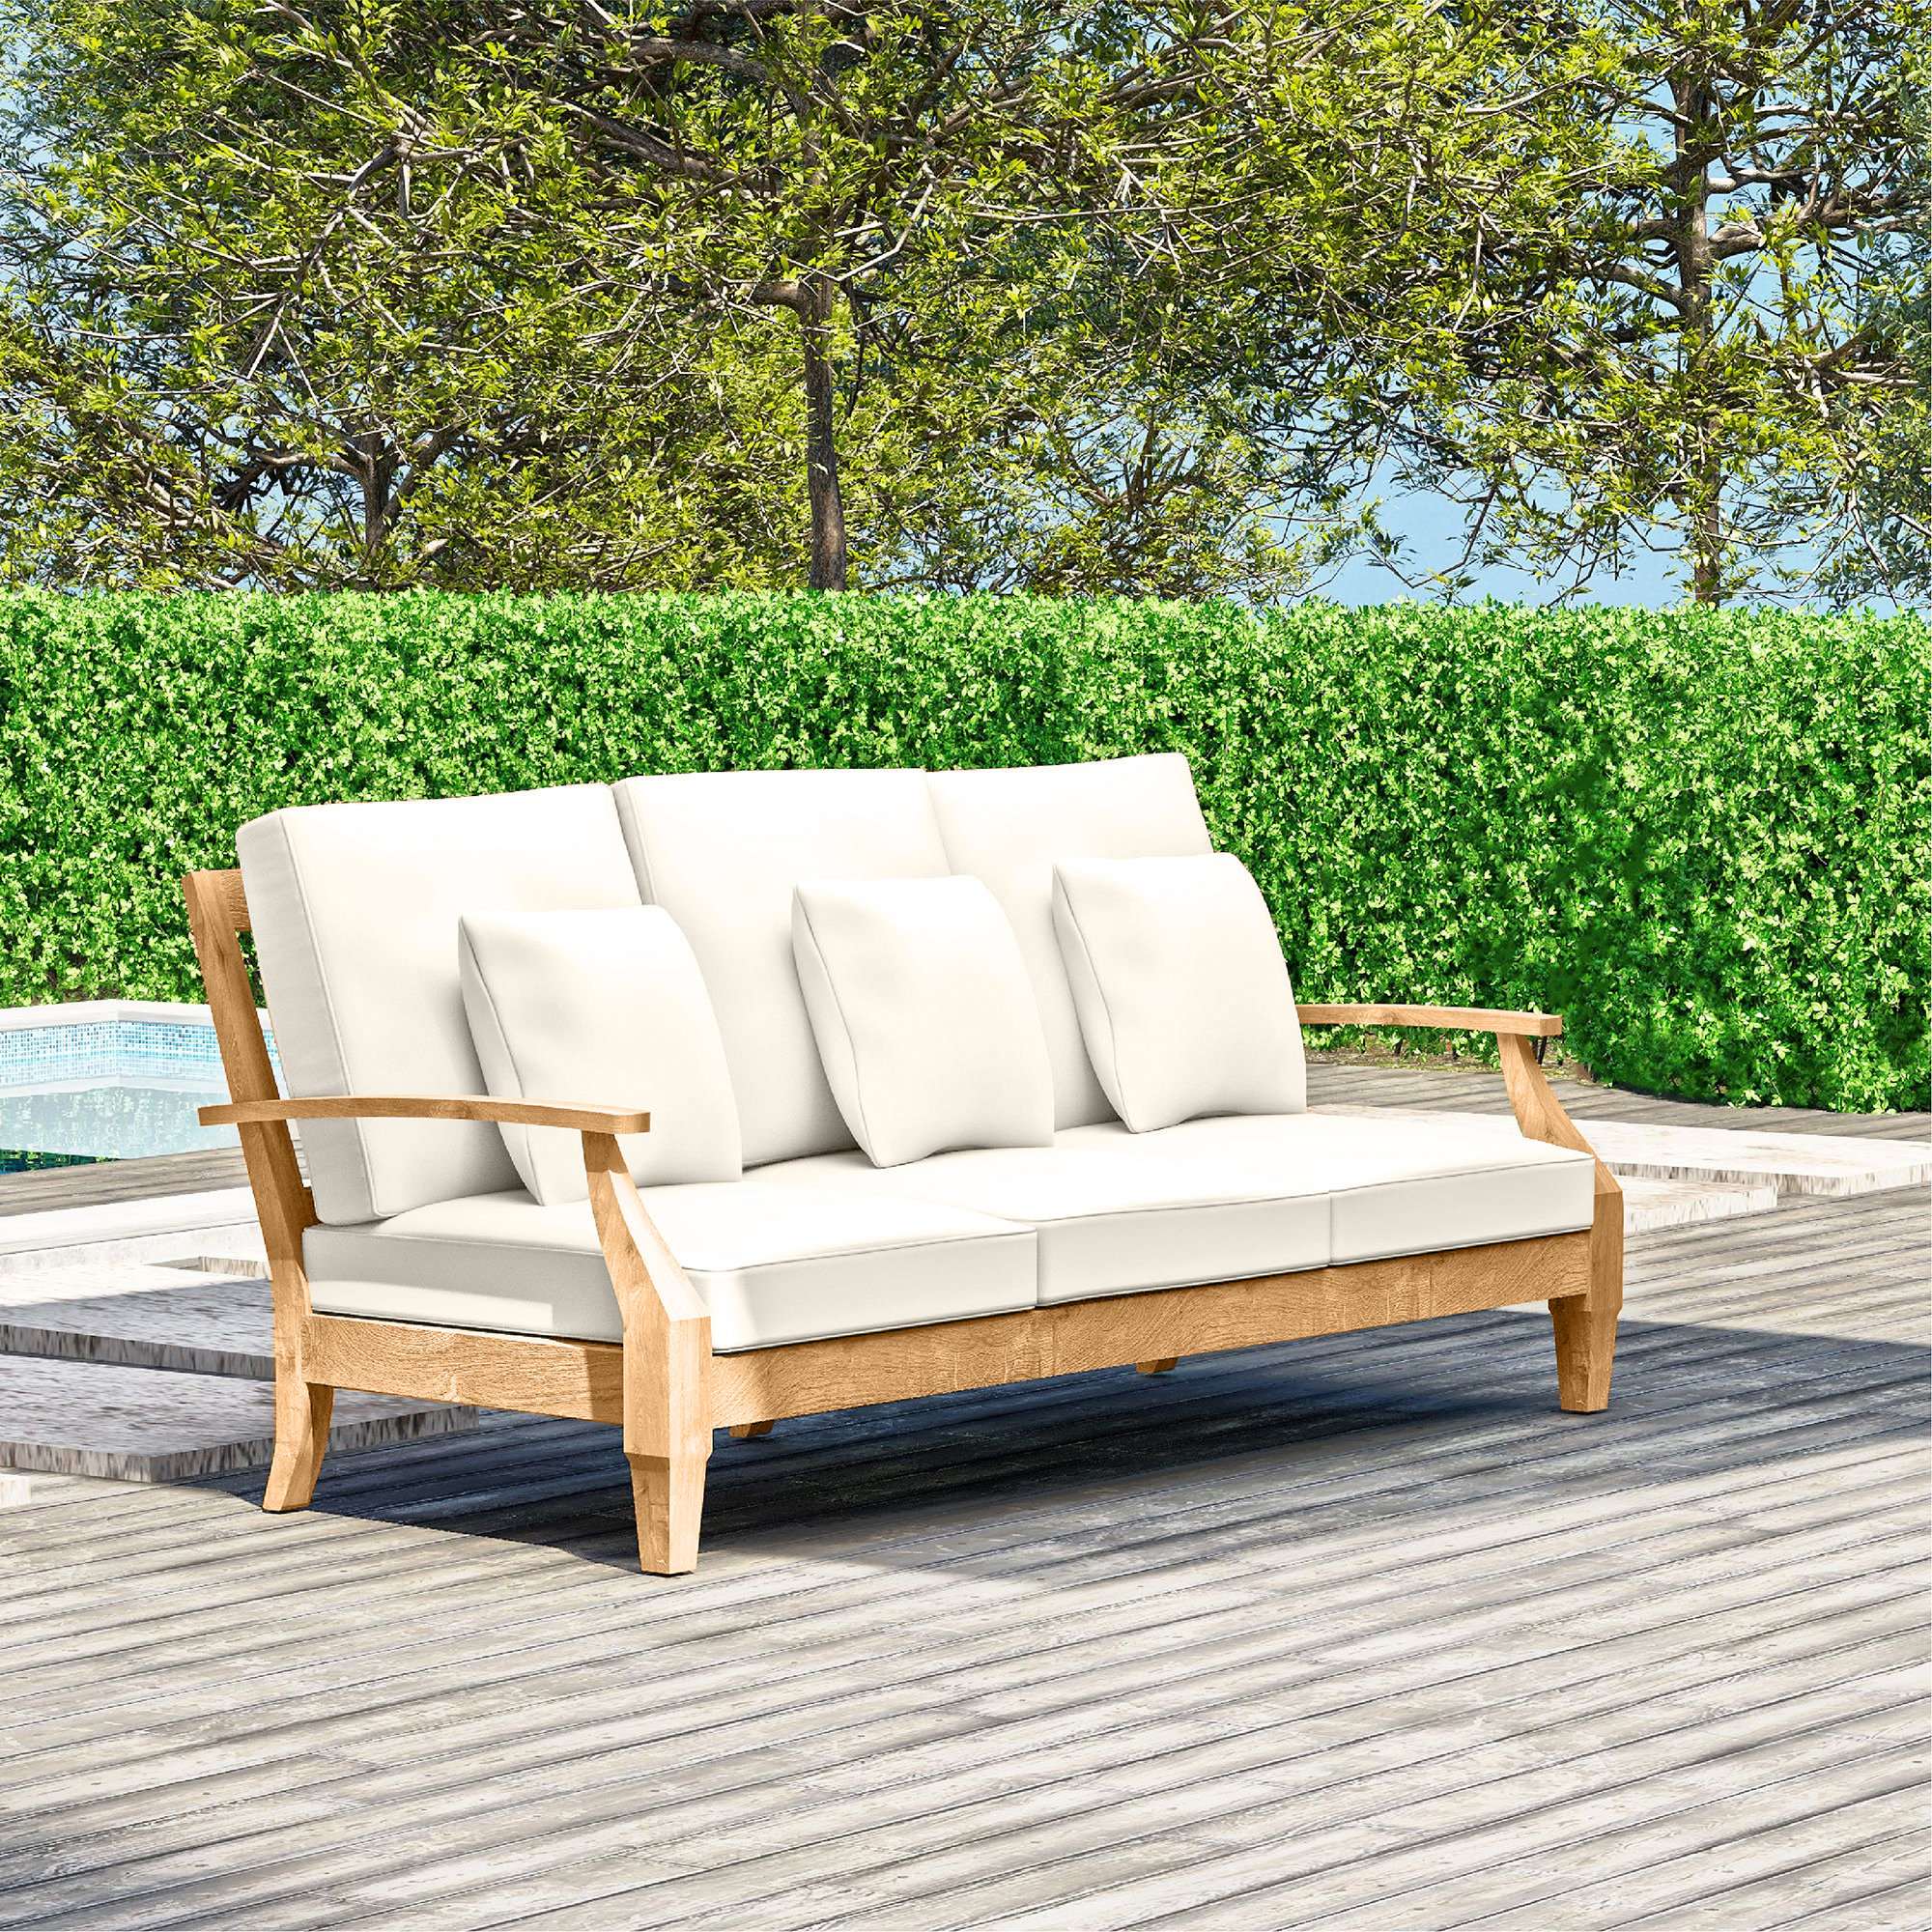 Byxbee 84.25 Wide Outdoor Patio Sofa with Cushions Lark Manor Cushion Color: White